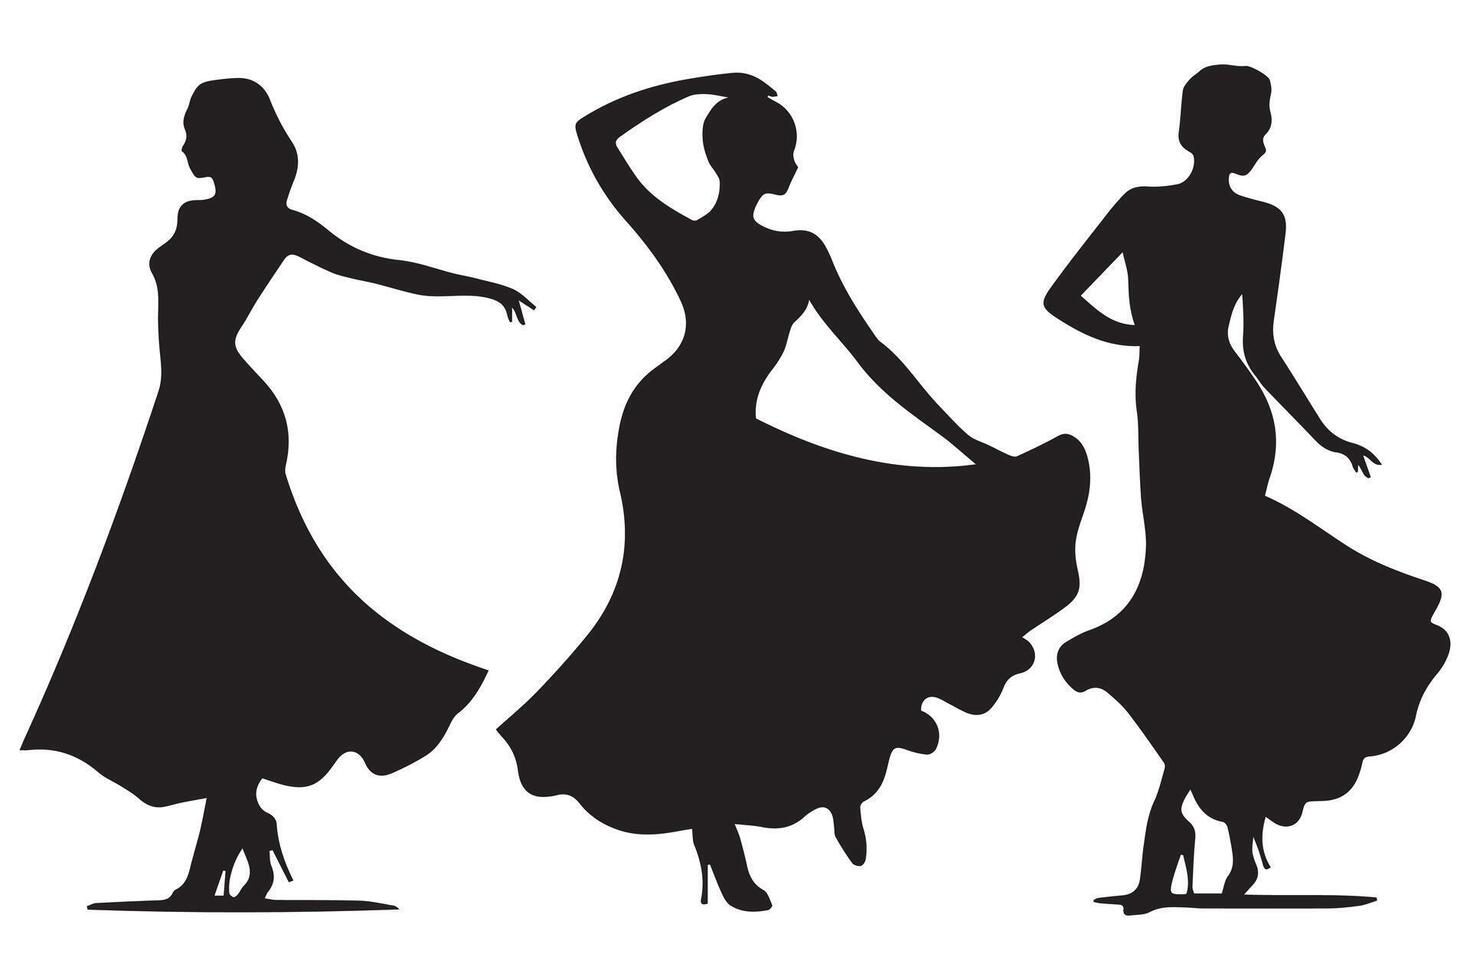 creative silhouettes happy dancing people on white background vector